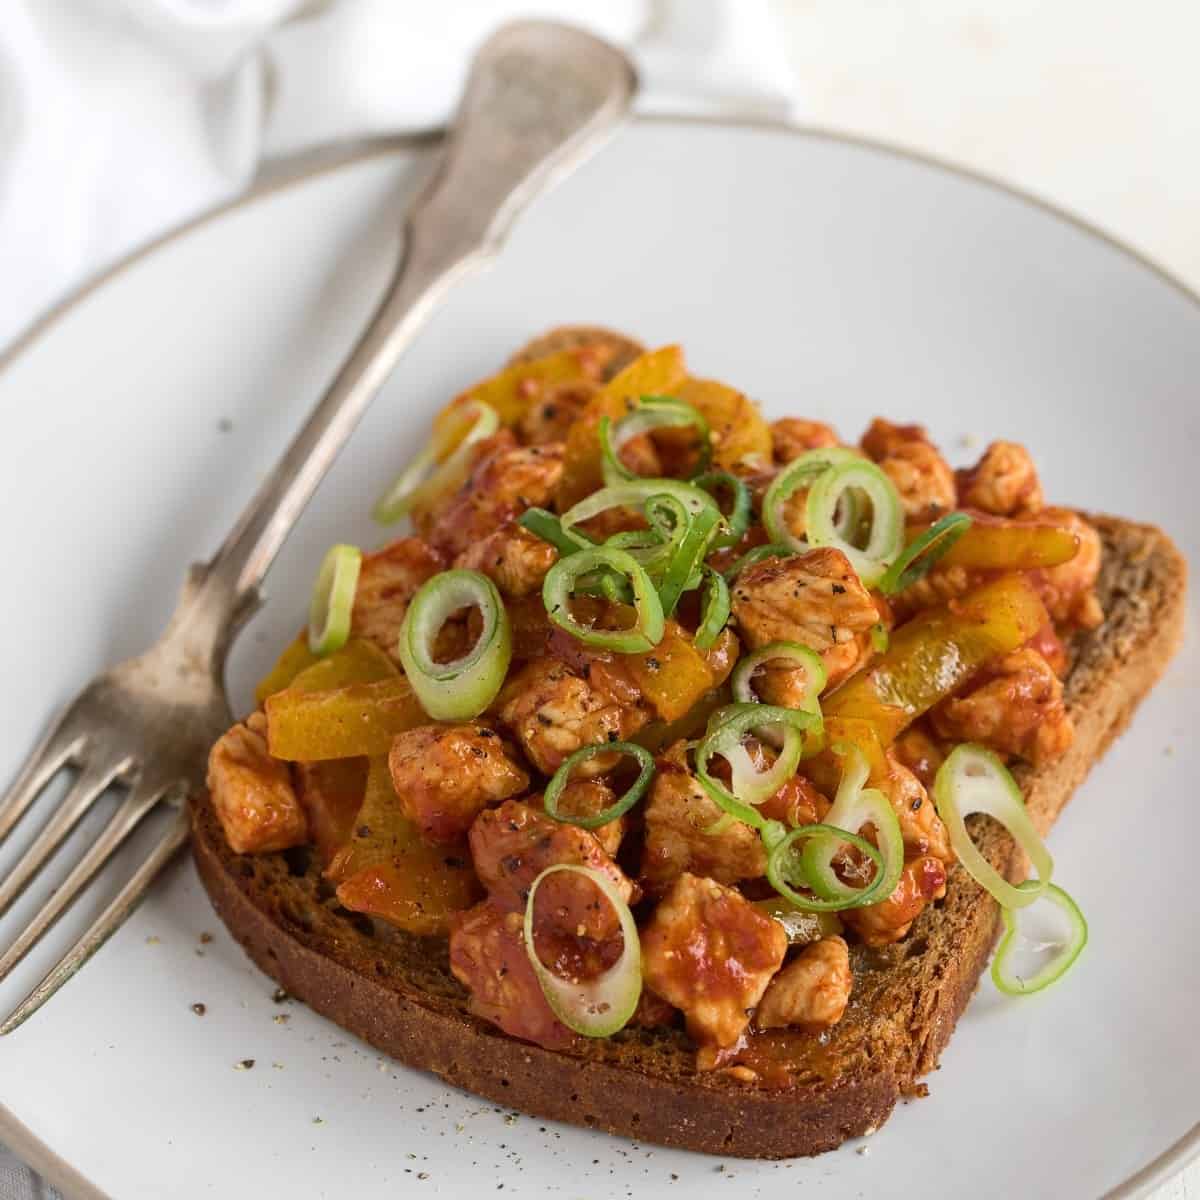 Open faced hot sandwich made with turkey and vegetable mixture, served on a plate with a fork.